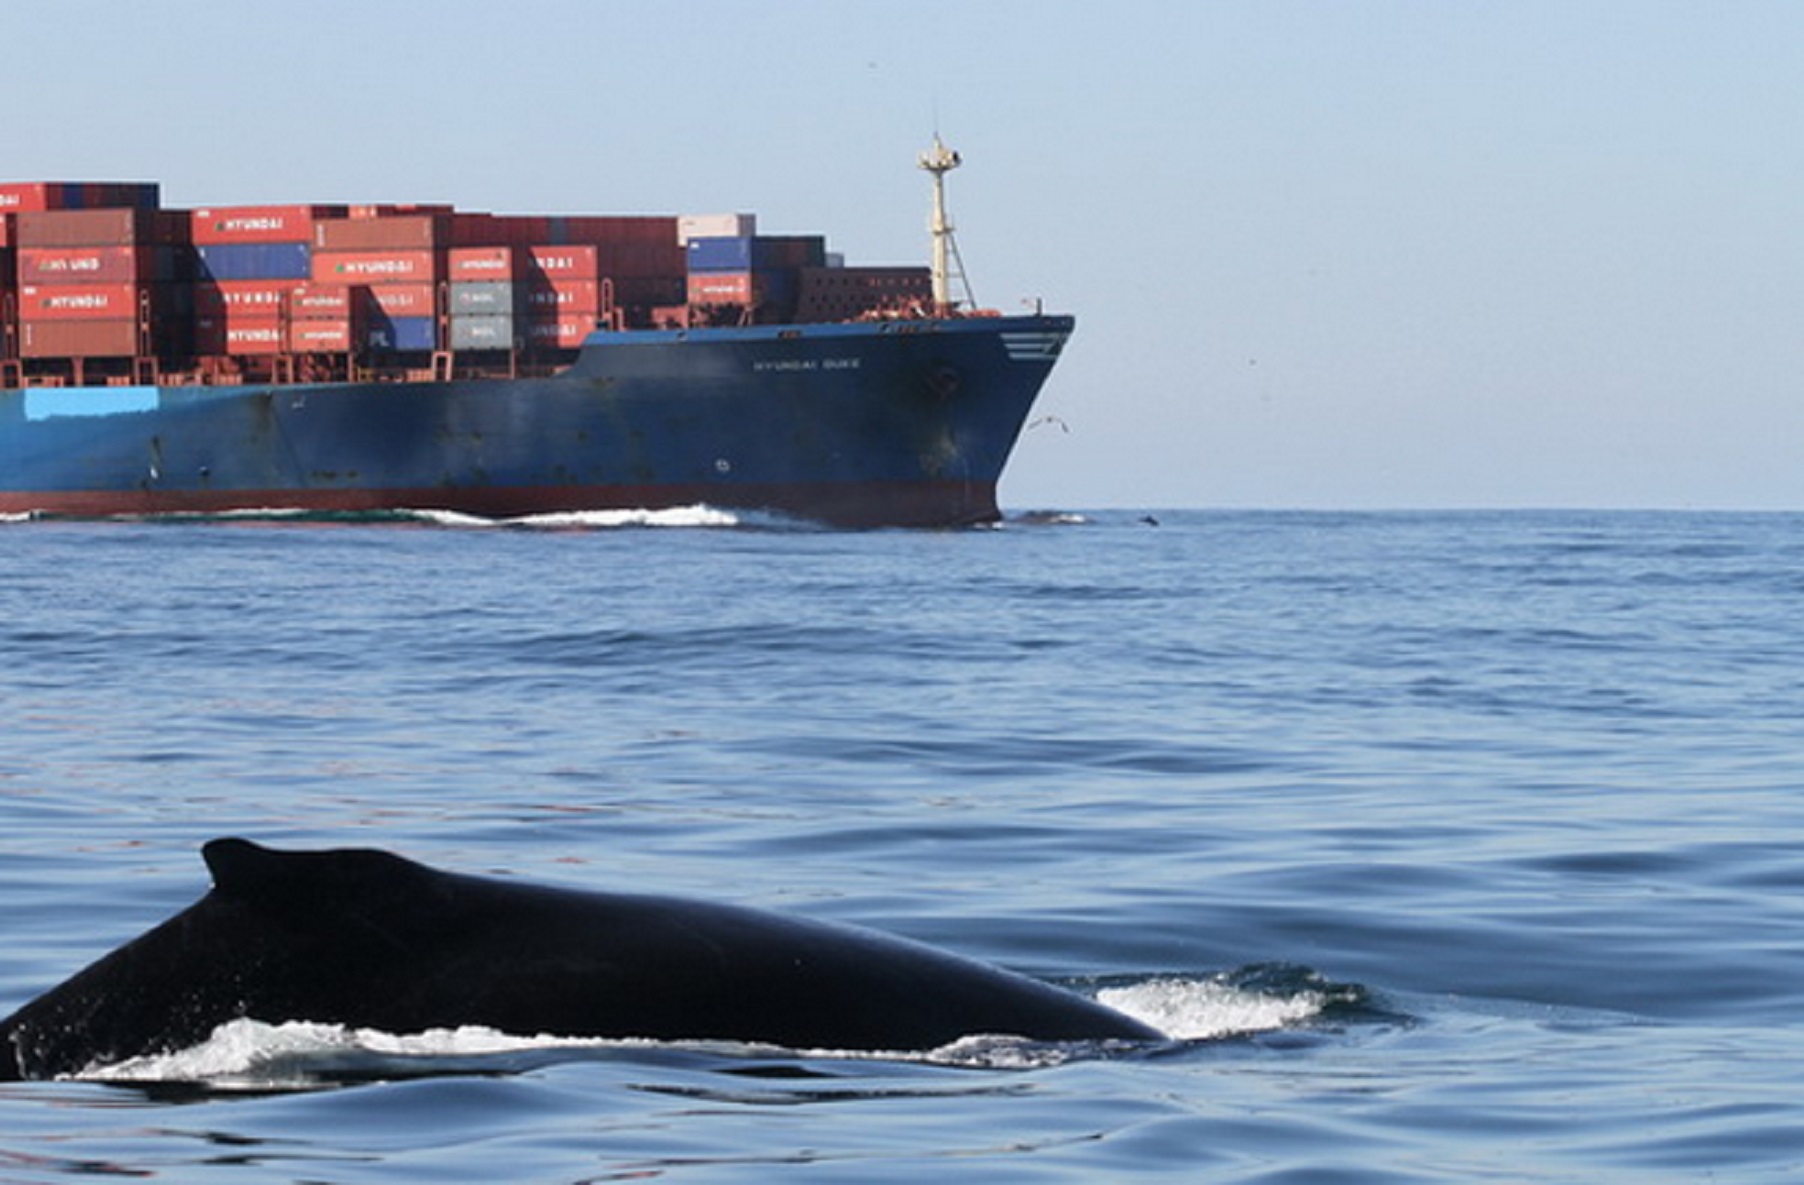 Reducing ship strikes to vulnerable whales